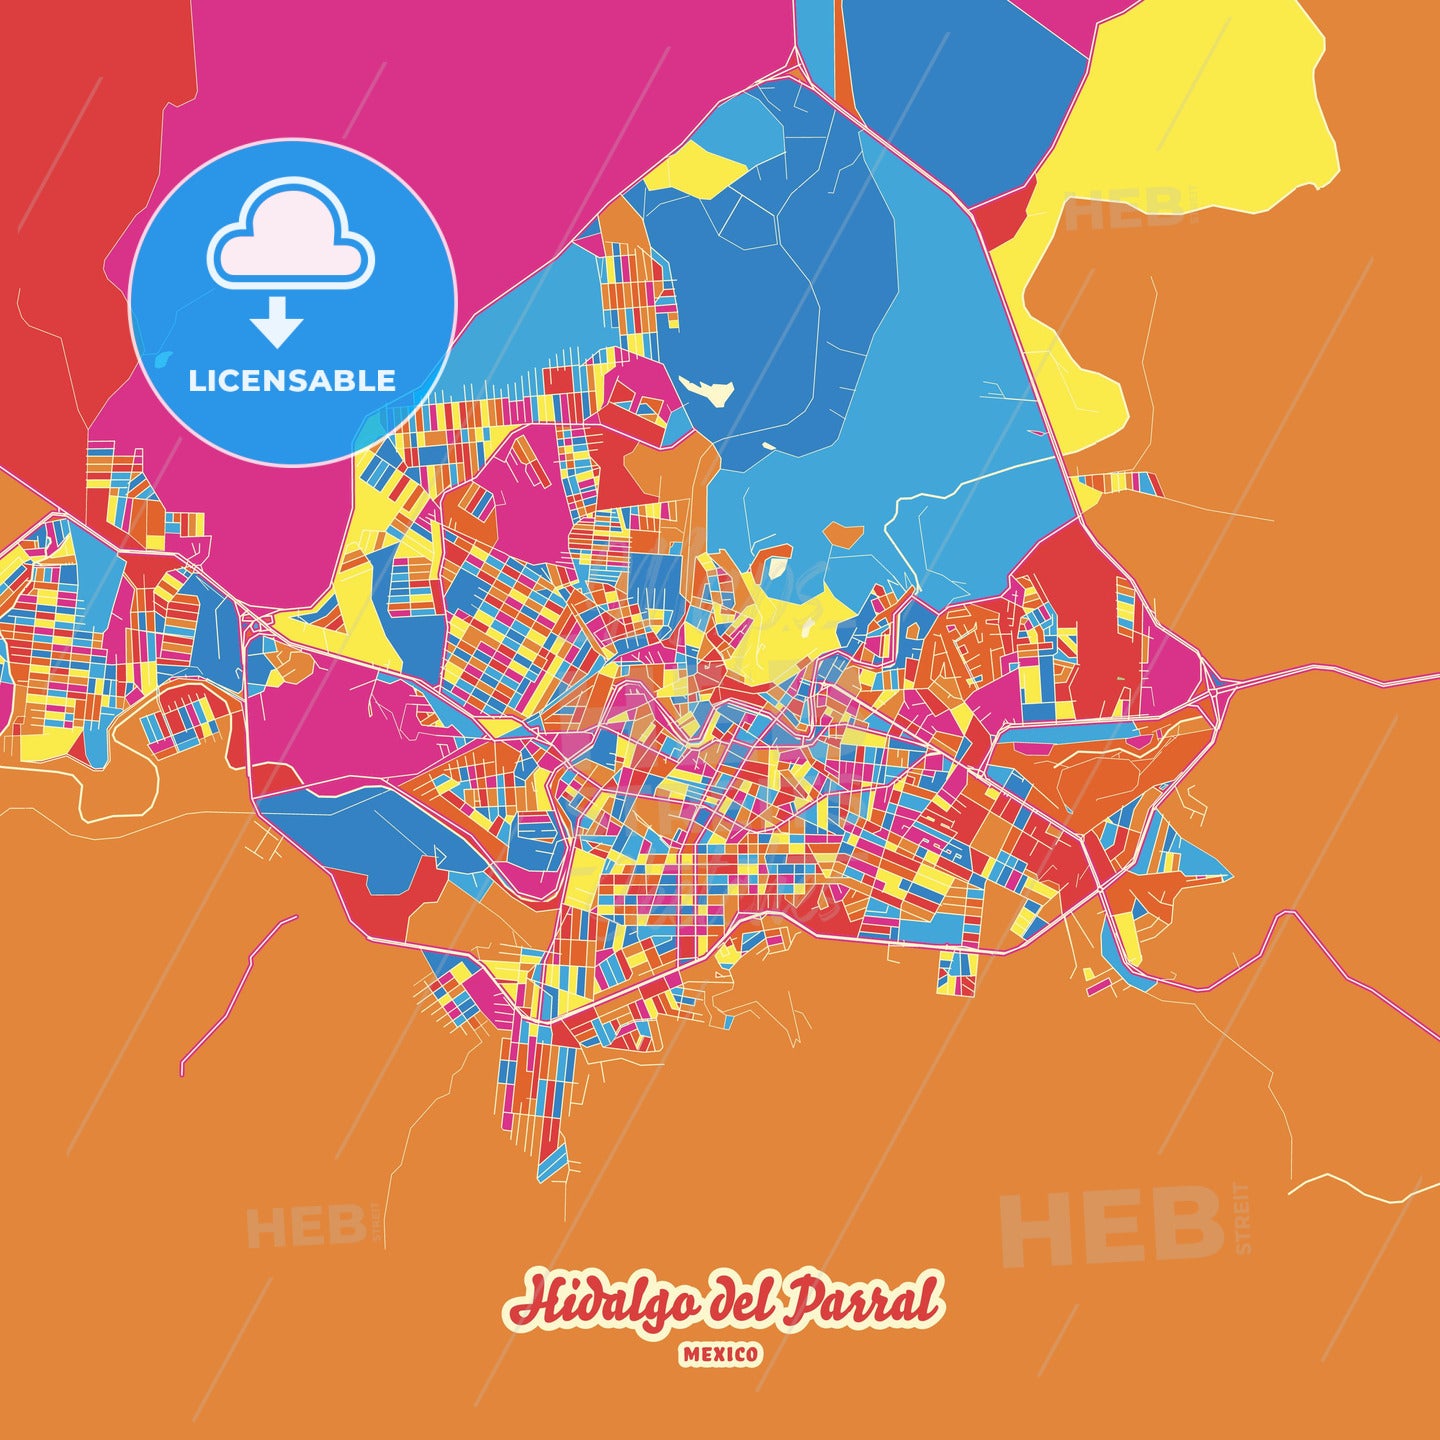 Hidalgo del Parral, Mexico Crazy Colorful Street Map Poster Template - HEBSTREITS Sketches